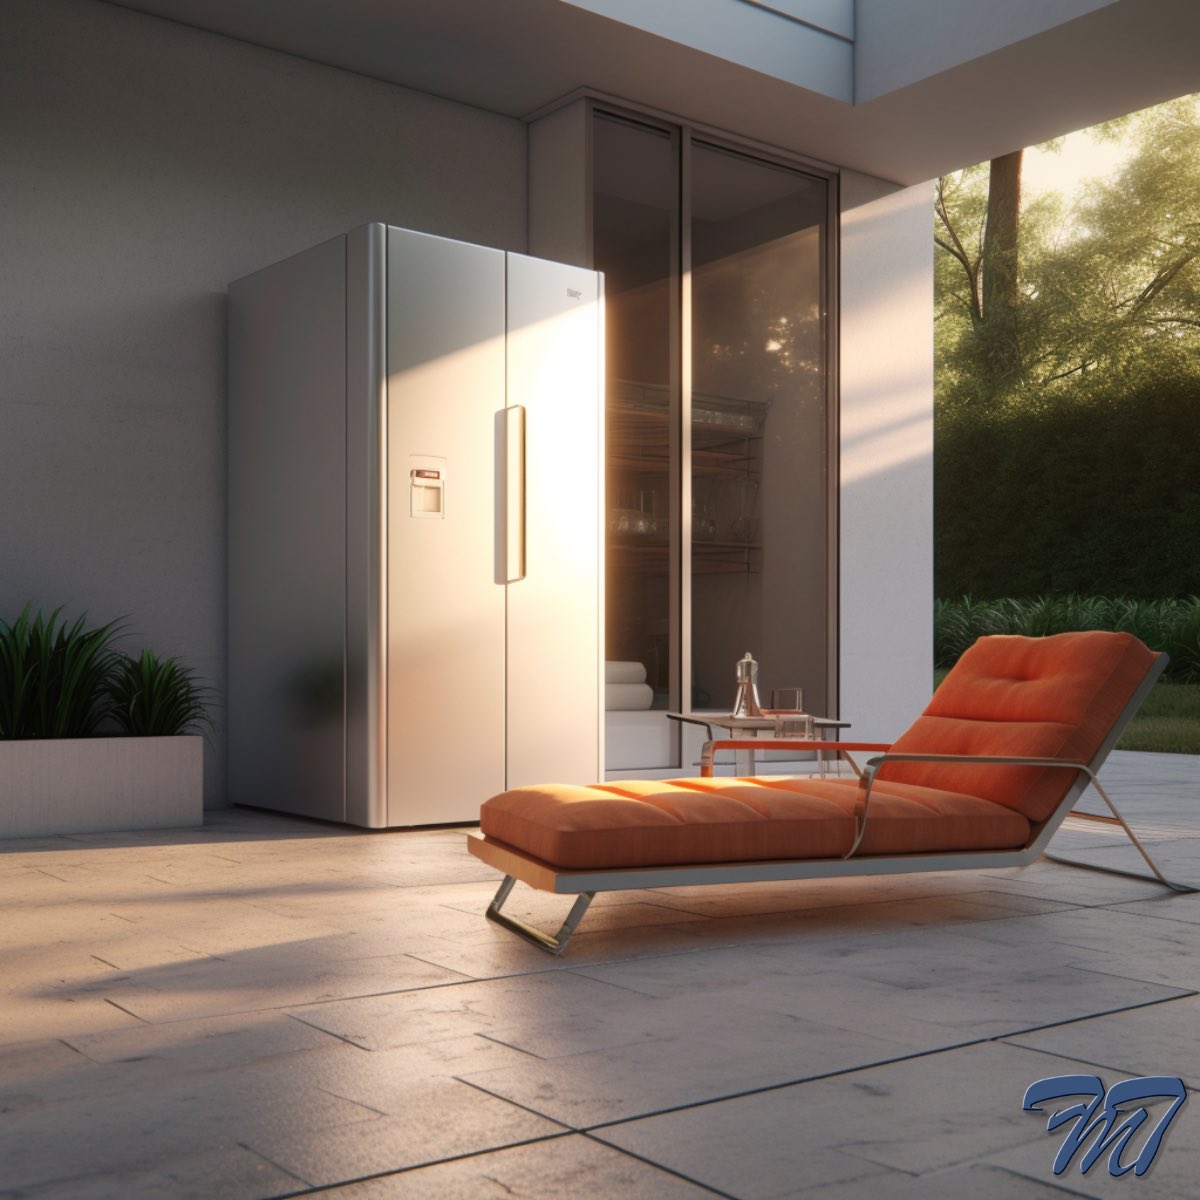 May 14th, aka Mother's Day, is around the corner! 📅 Still time to surprise her with that comfy patio lounger or that sleek refrigerator. And hey, we'll pick-up and deliver. No sweat! 💪

#DeliverySimplified #TiyendeMagic